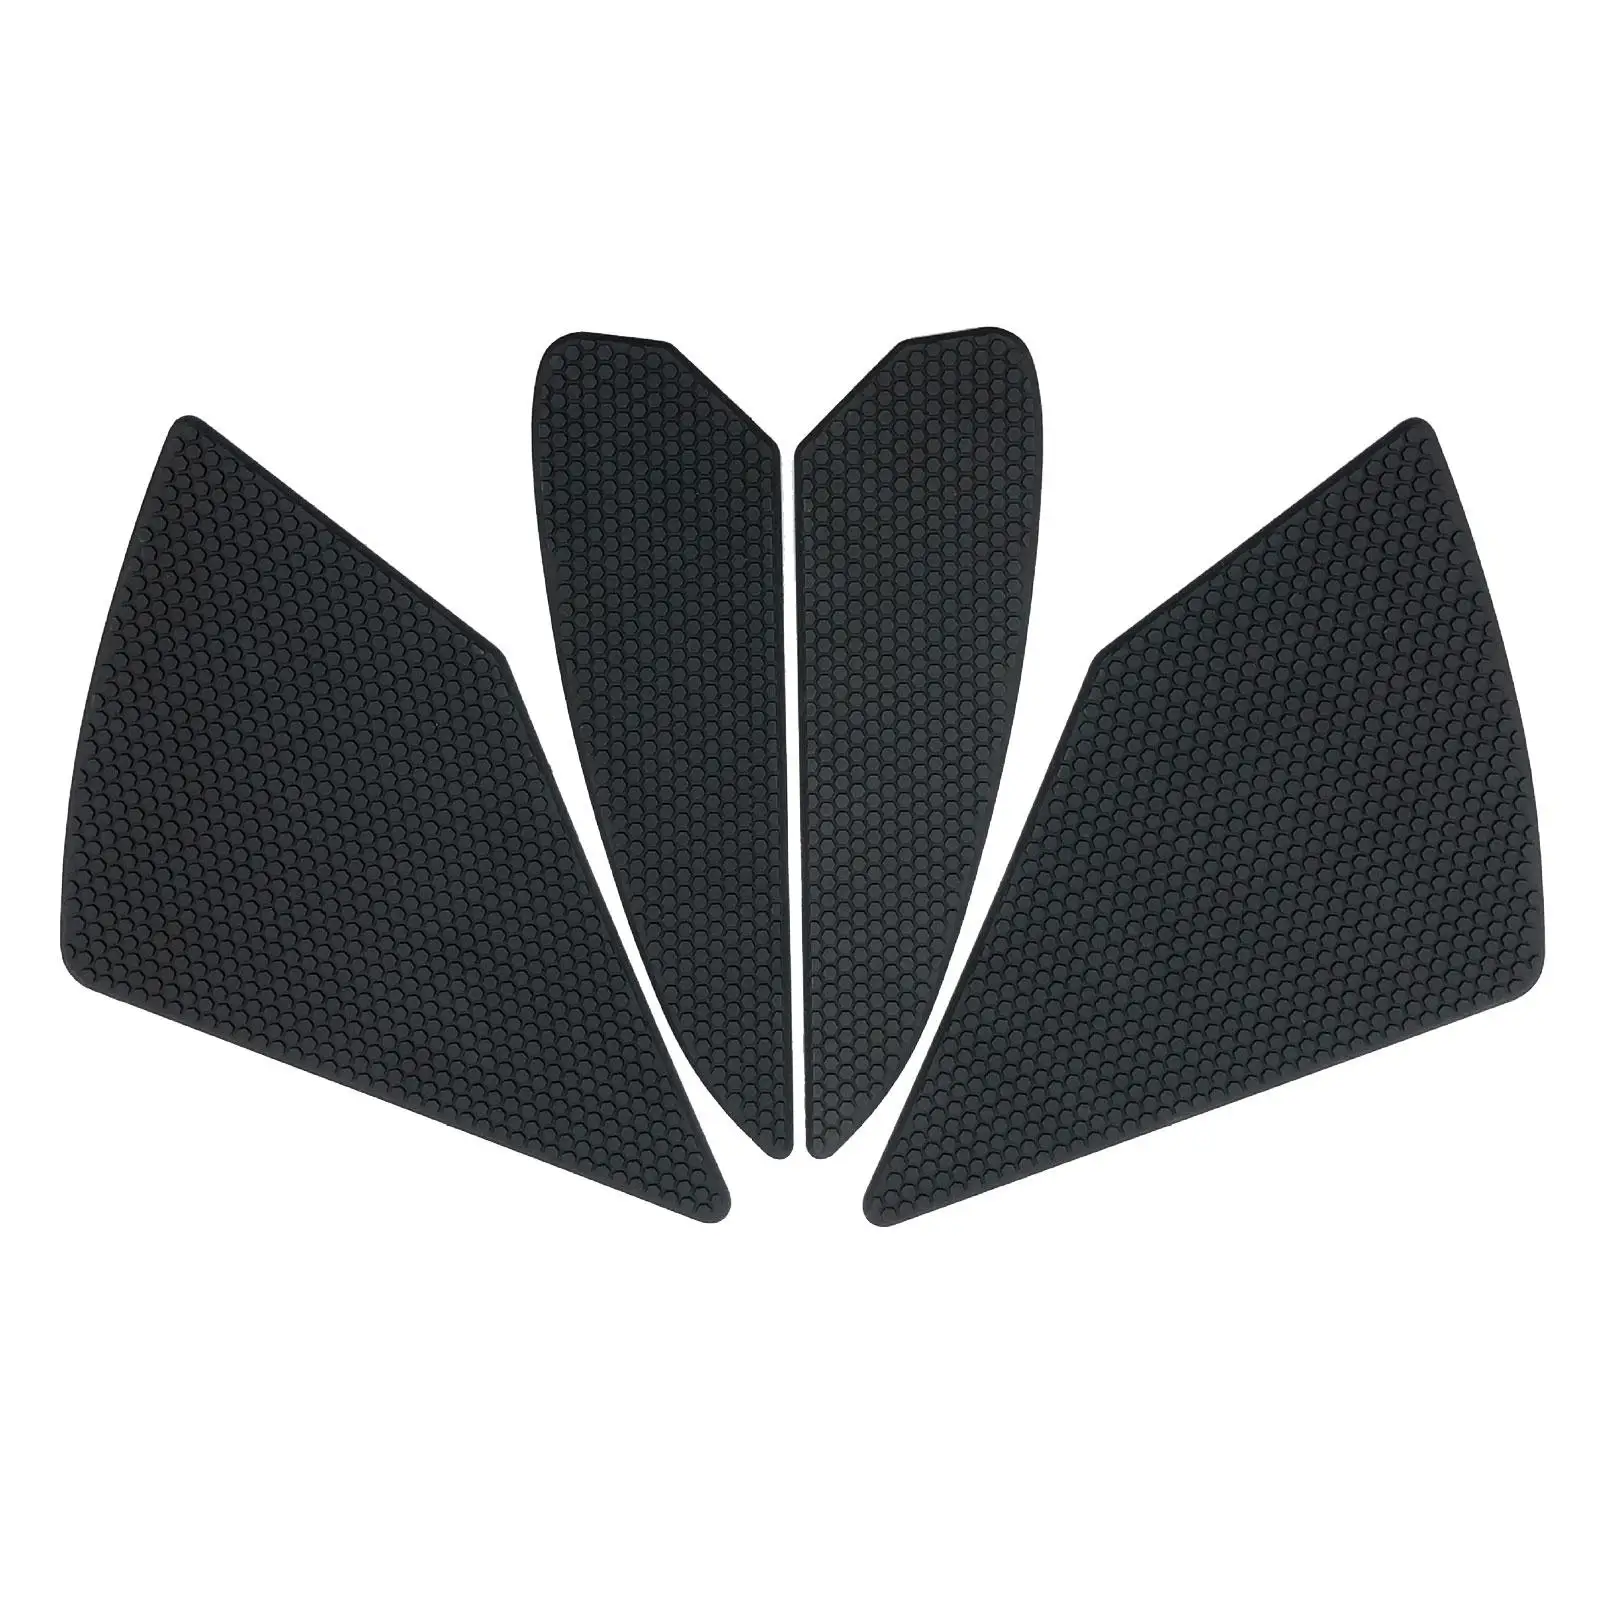 Black Motorcycle Tank Traction Pad for Triumph Speed Triple Replacement